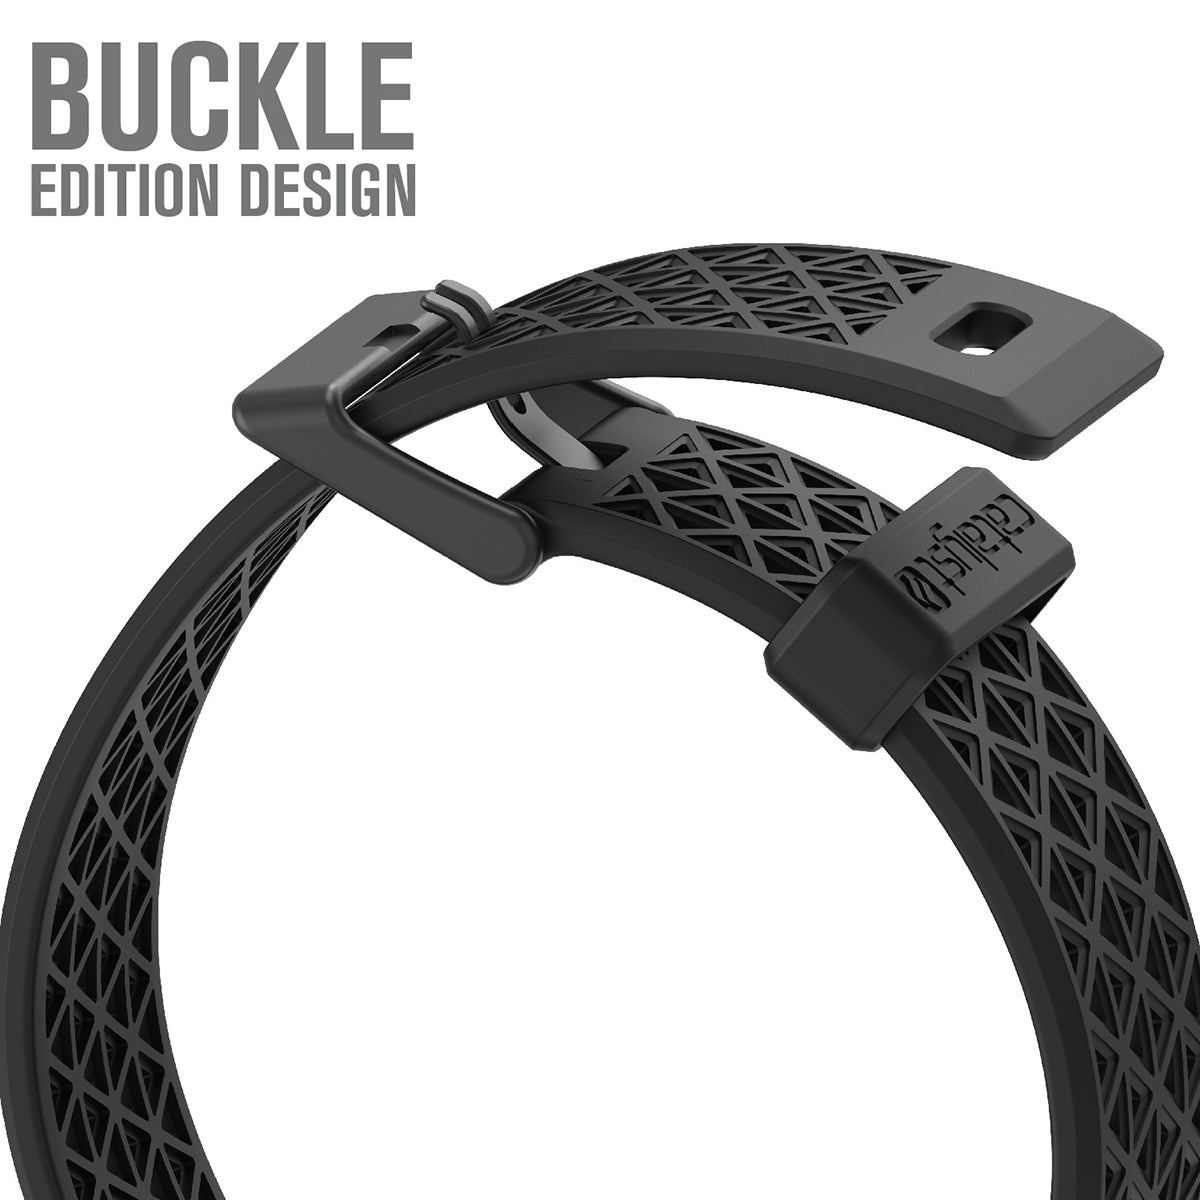 catalyst apple watch series 9 8 7 6 5 4 SE Gen 2 1 38 40 41mm sport band buckle edition showing the buckle edition design black text reads buckle edition design